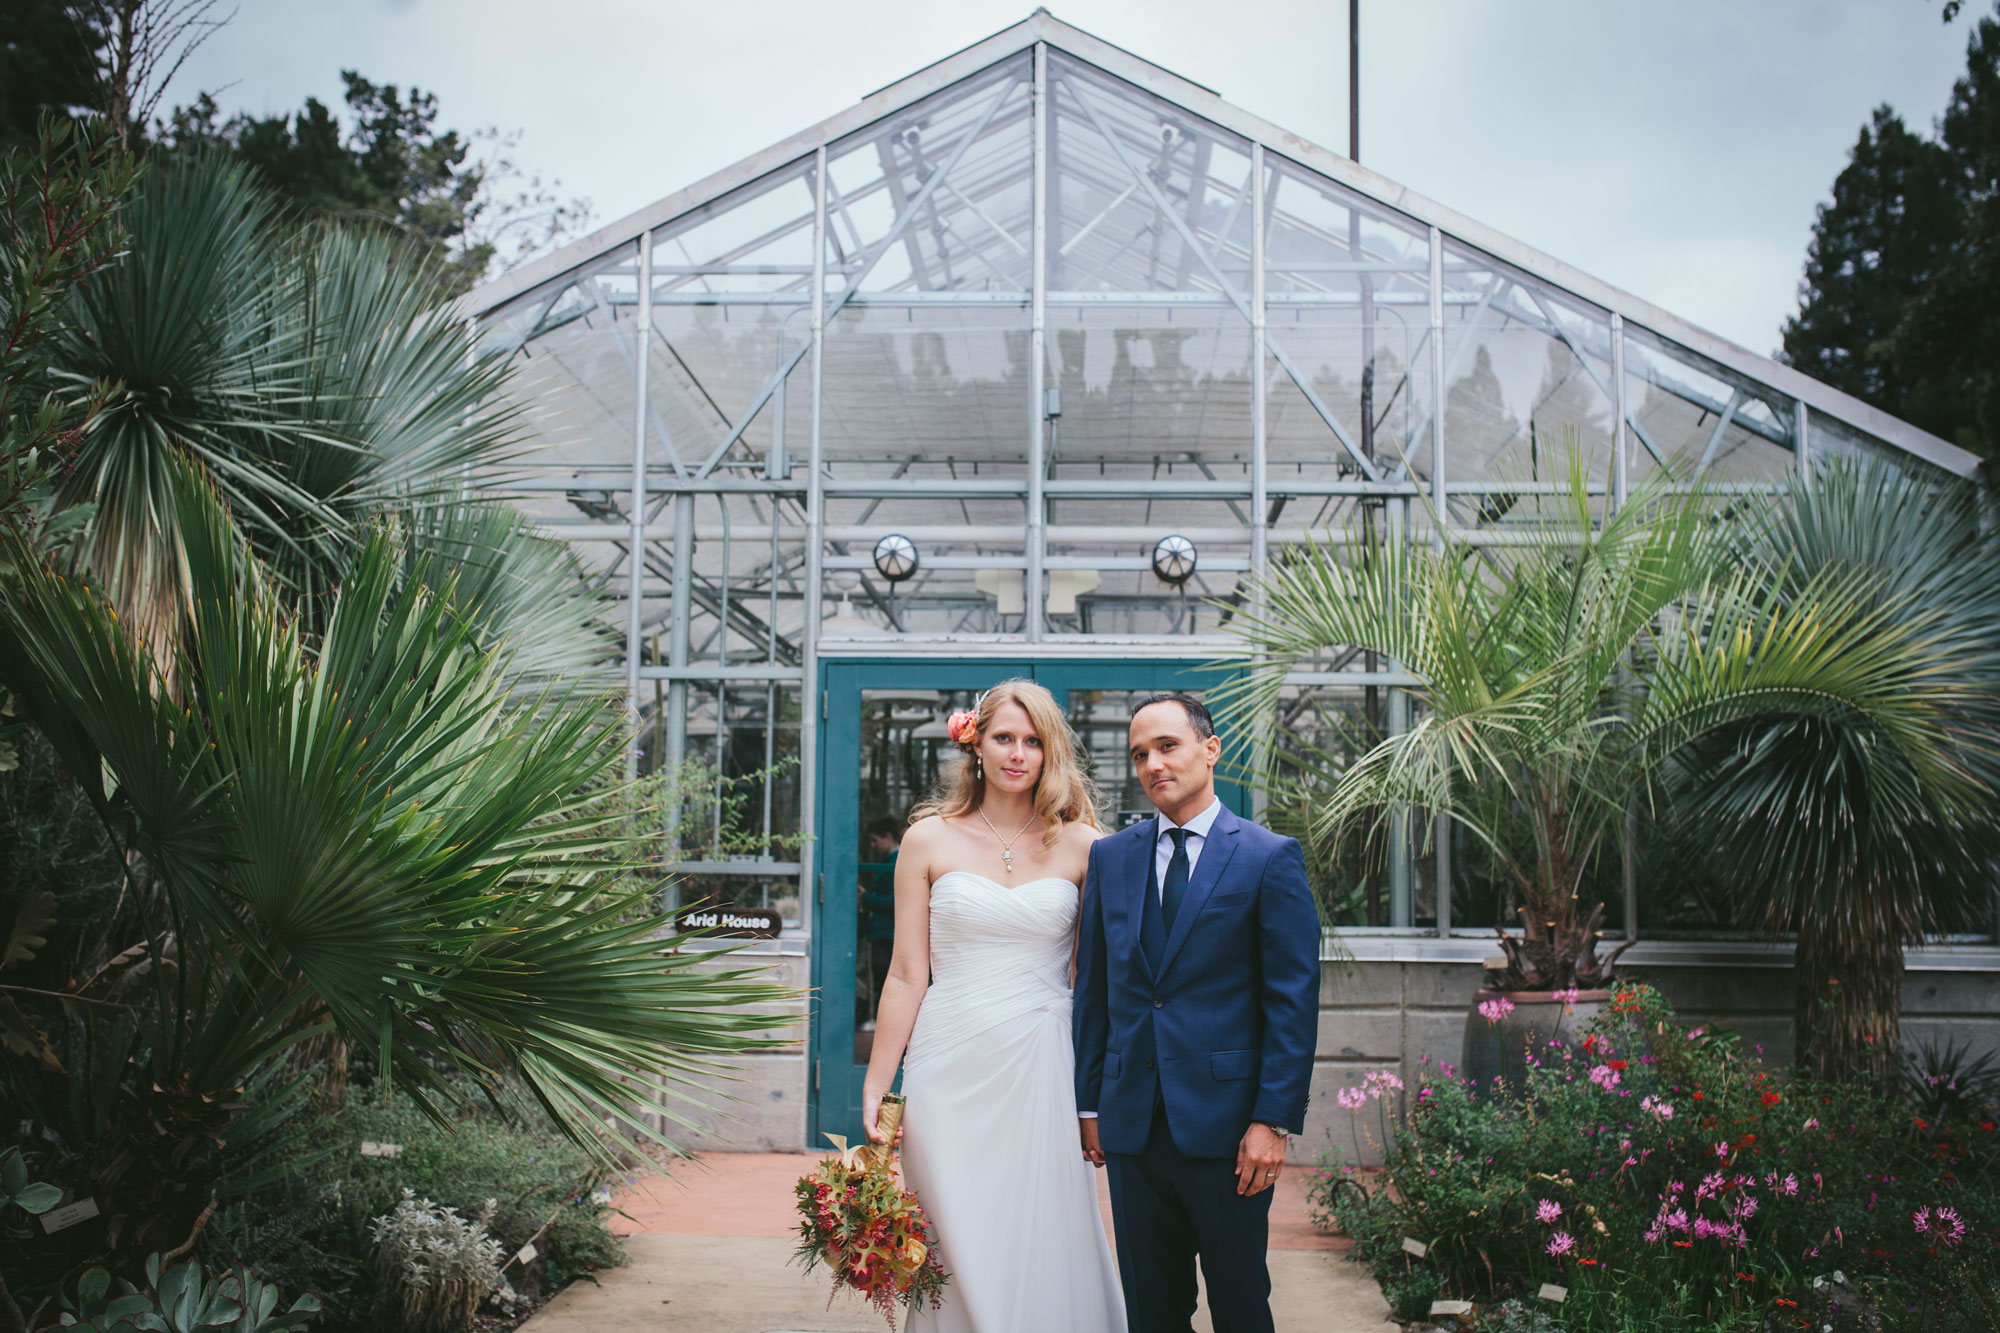 Bride and groom in front of greenhouse at Berkeley Botanical Garden by Becca Henry Photography